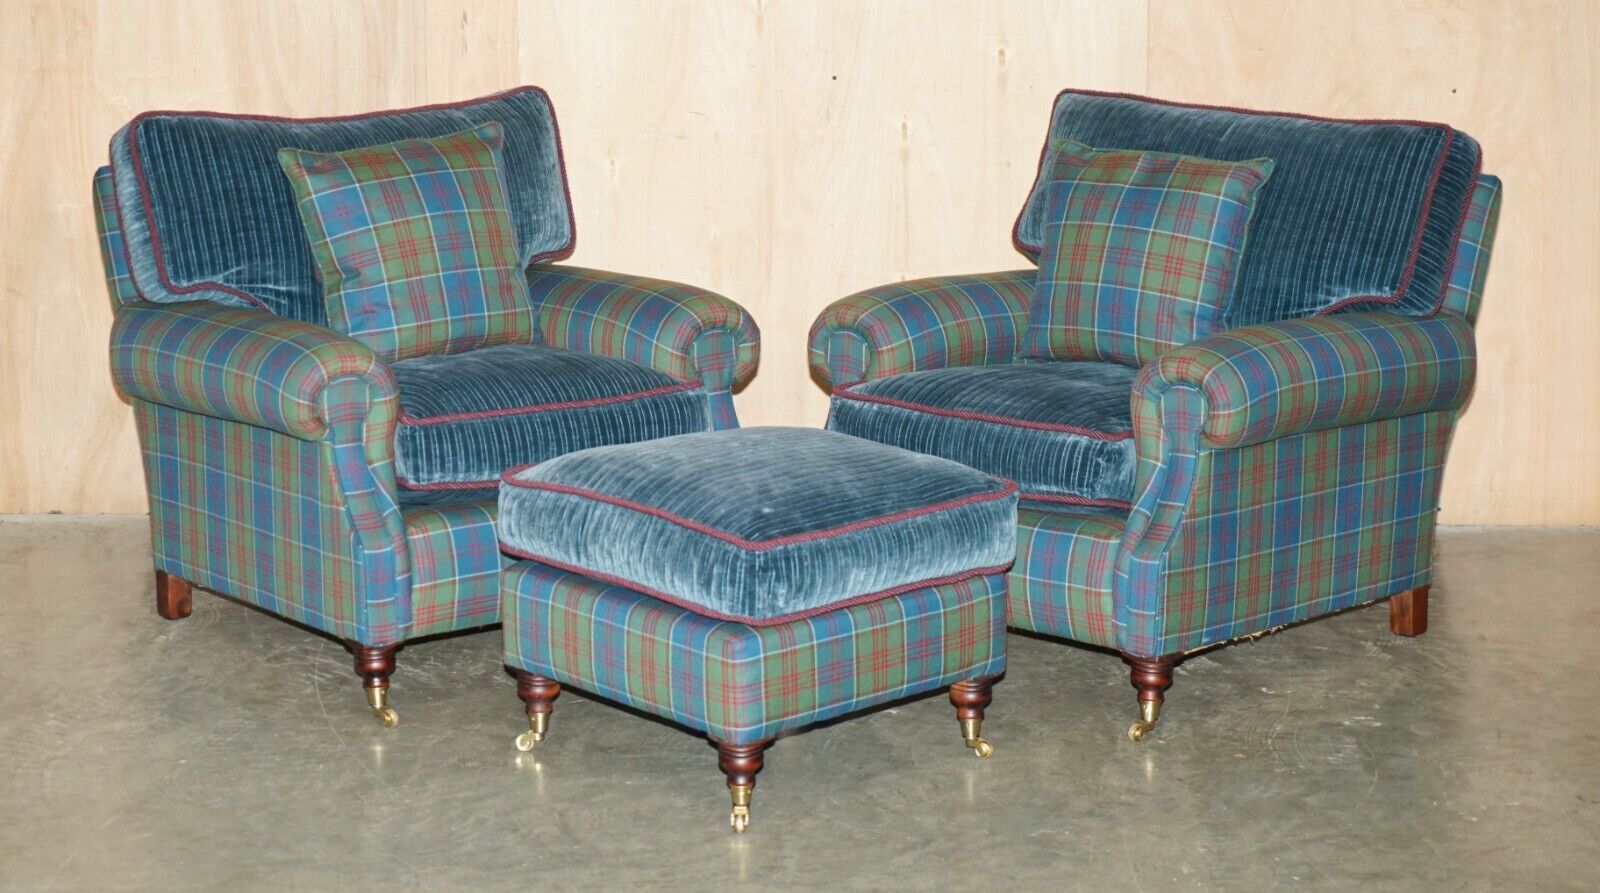 PAIR OF GEORGE SMITH ATTRIBUTED SIGNATURE SCROLL ARMCHAIRS WITH FOOTSTOOL